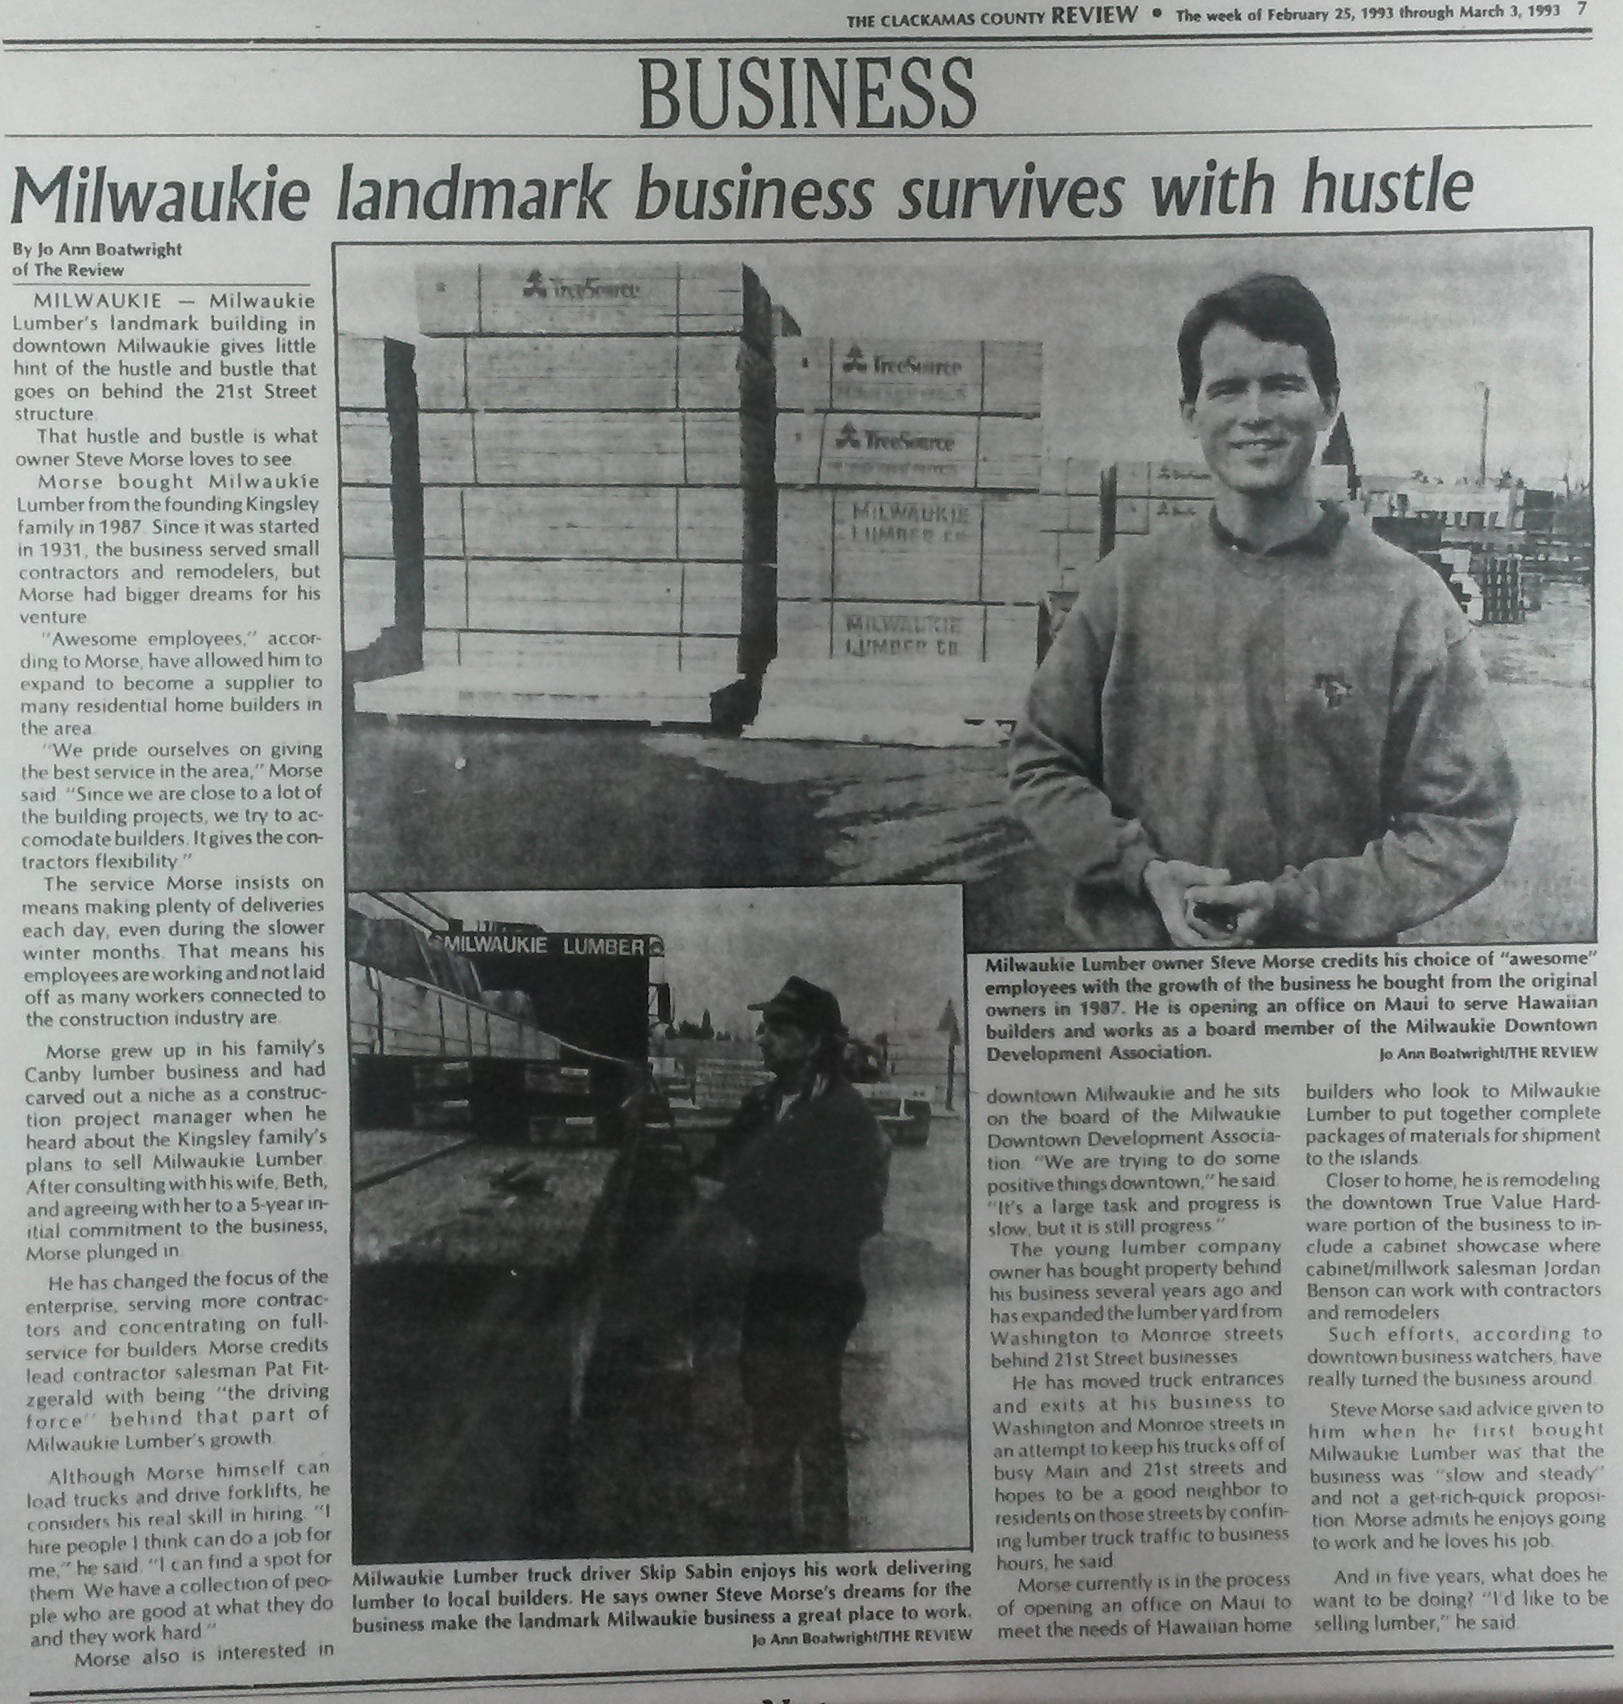 Milwaukie Lumber acquires new location in Vancouver Wa article.